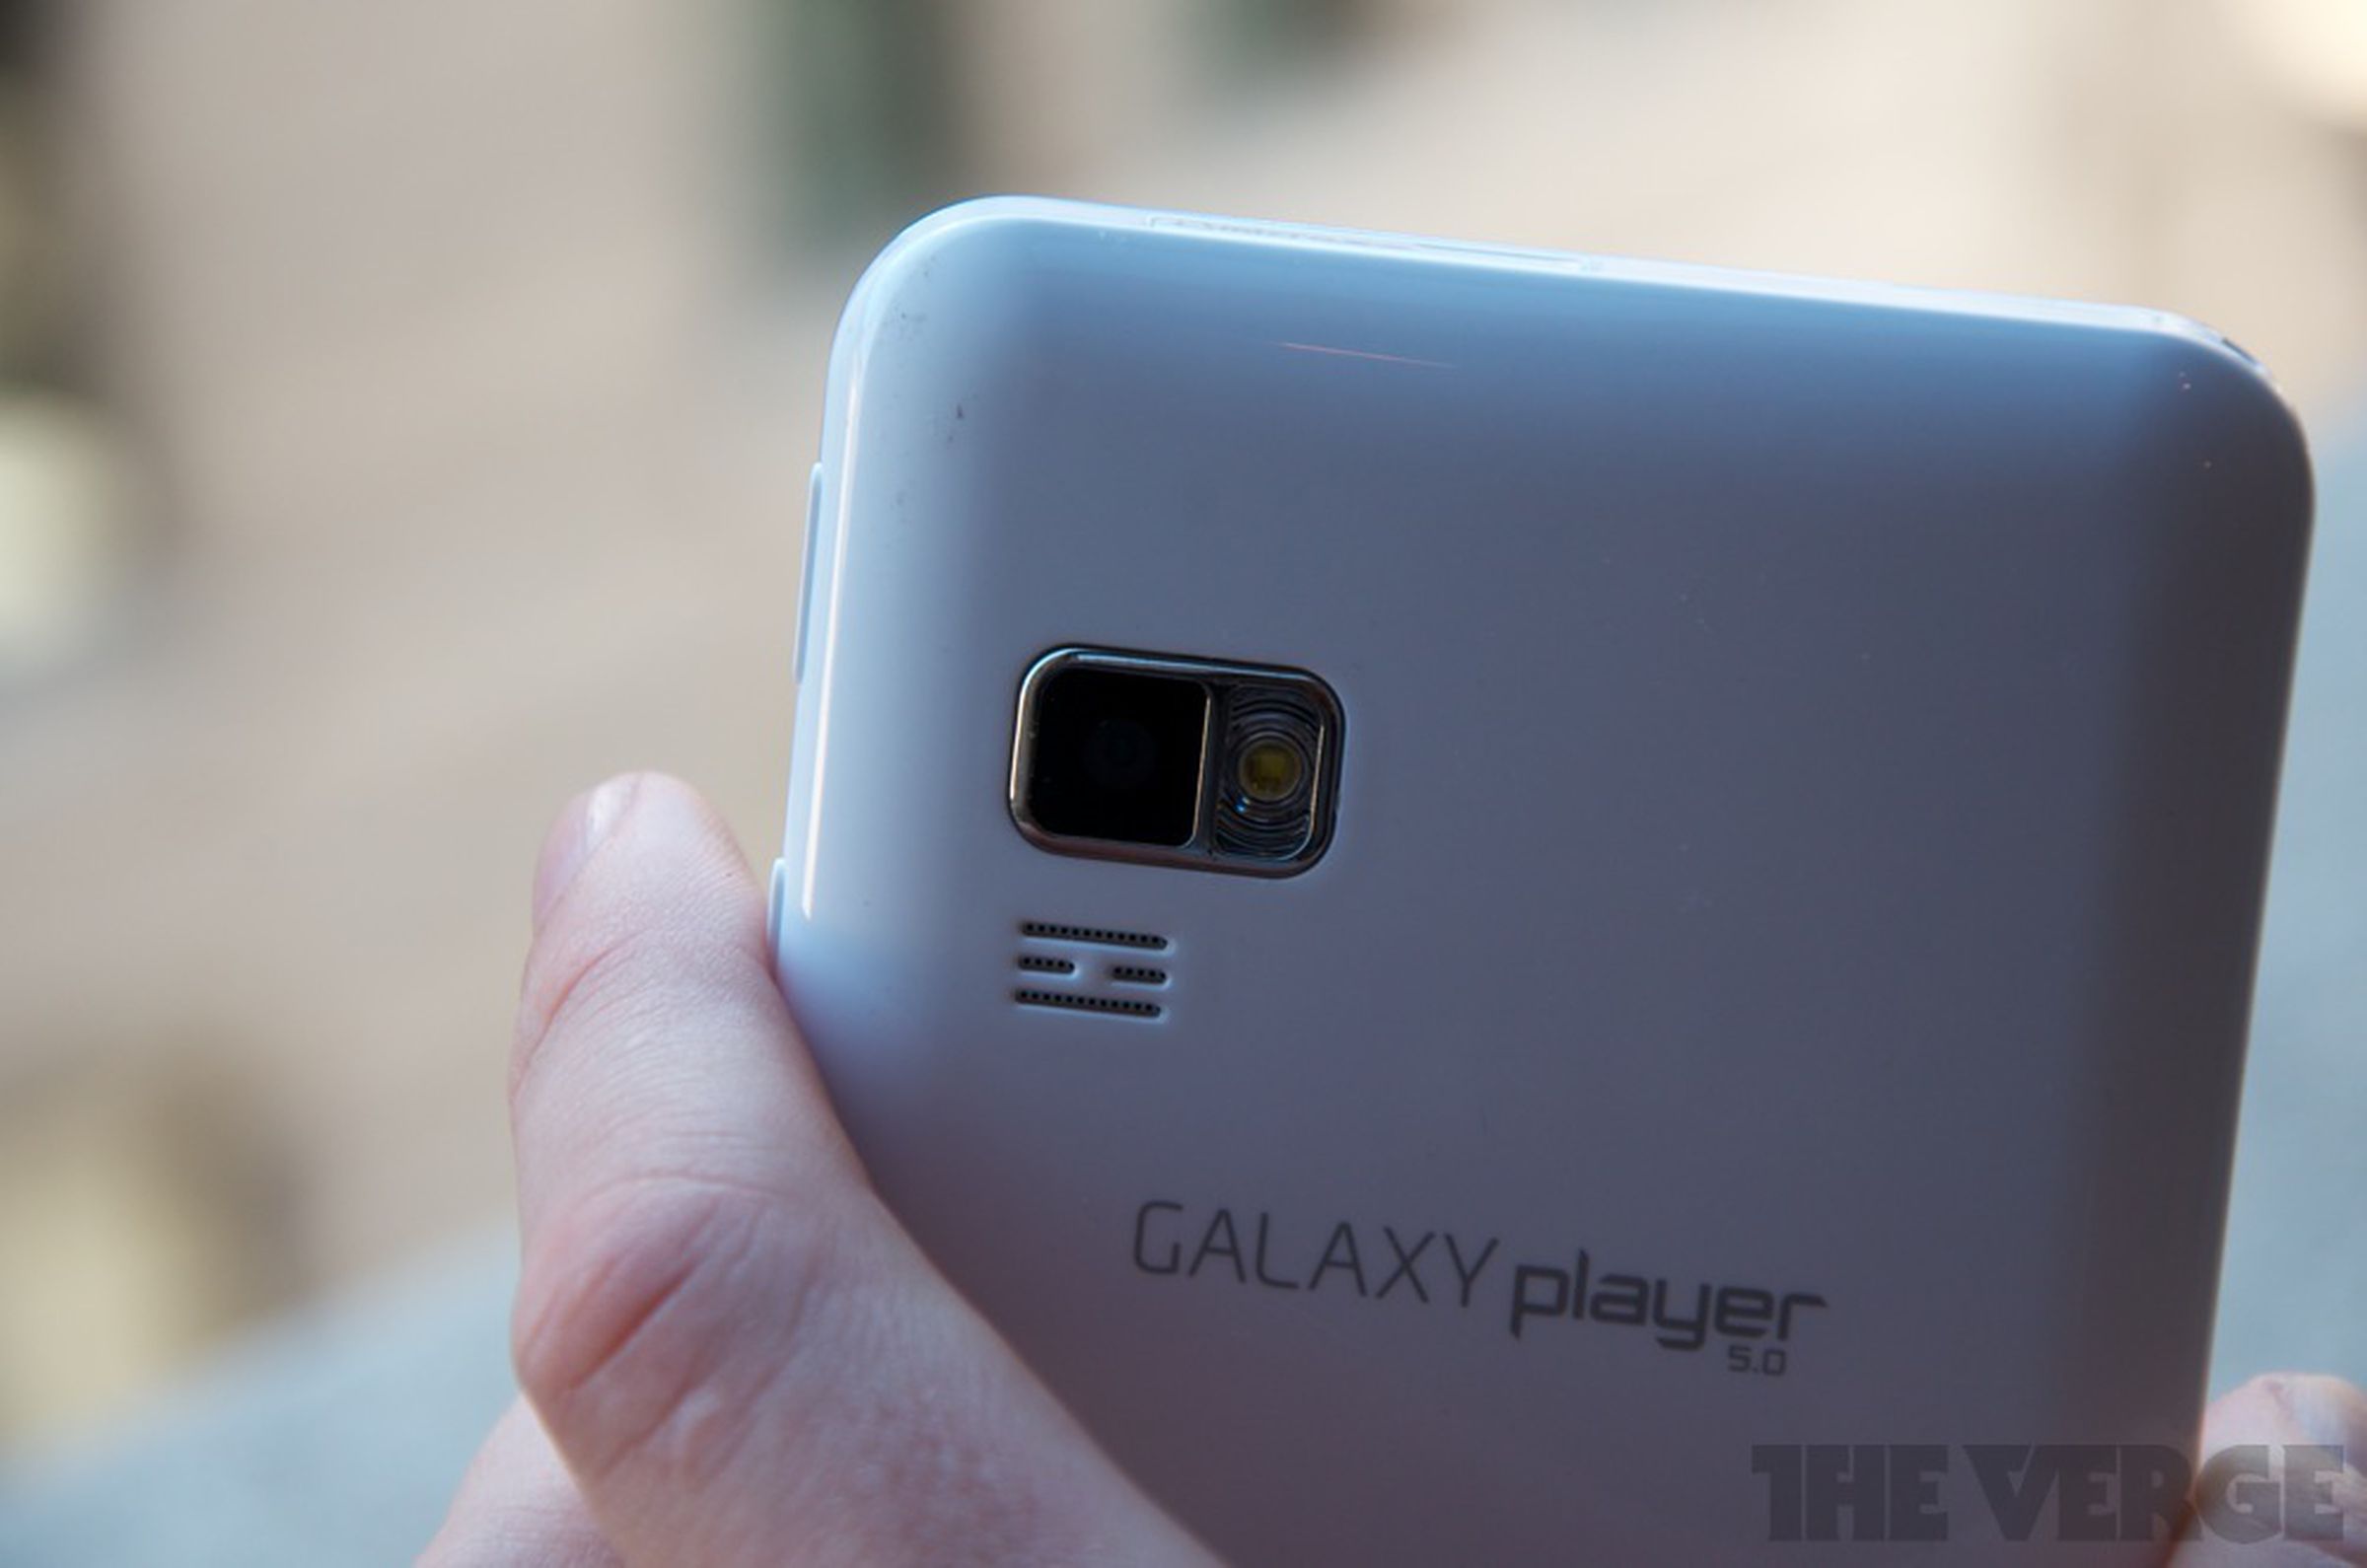 Samsung Galaxy Player 4.0 and 5.0 review photos